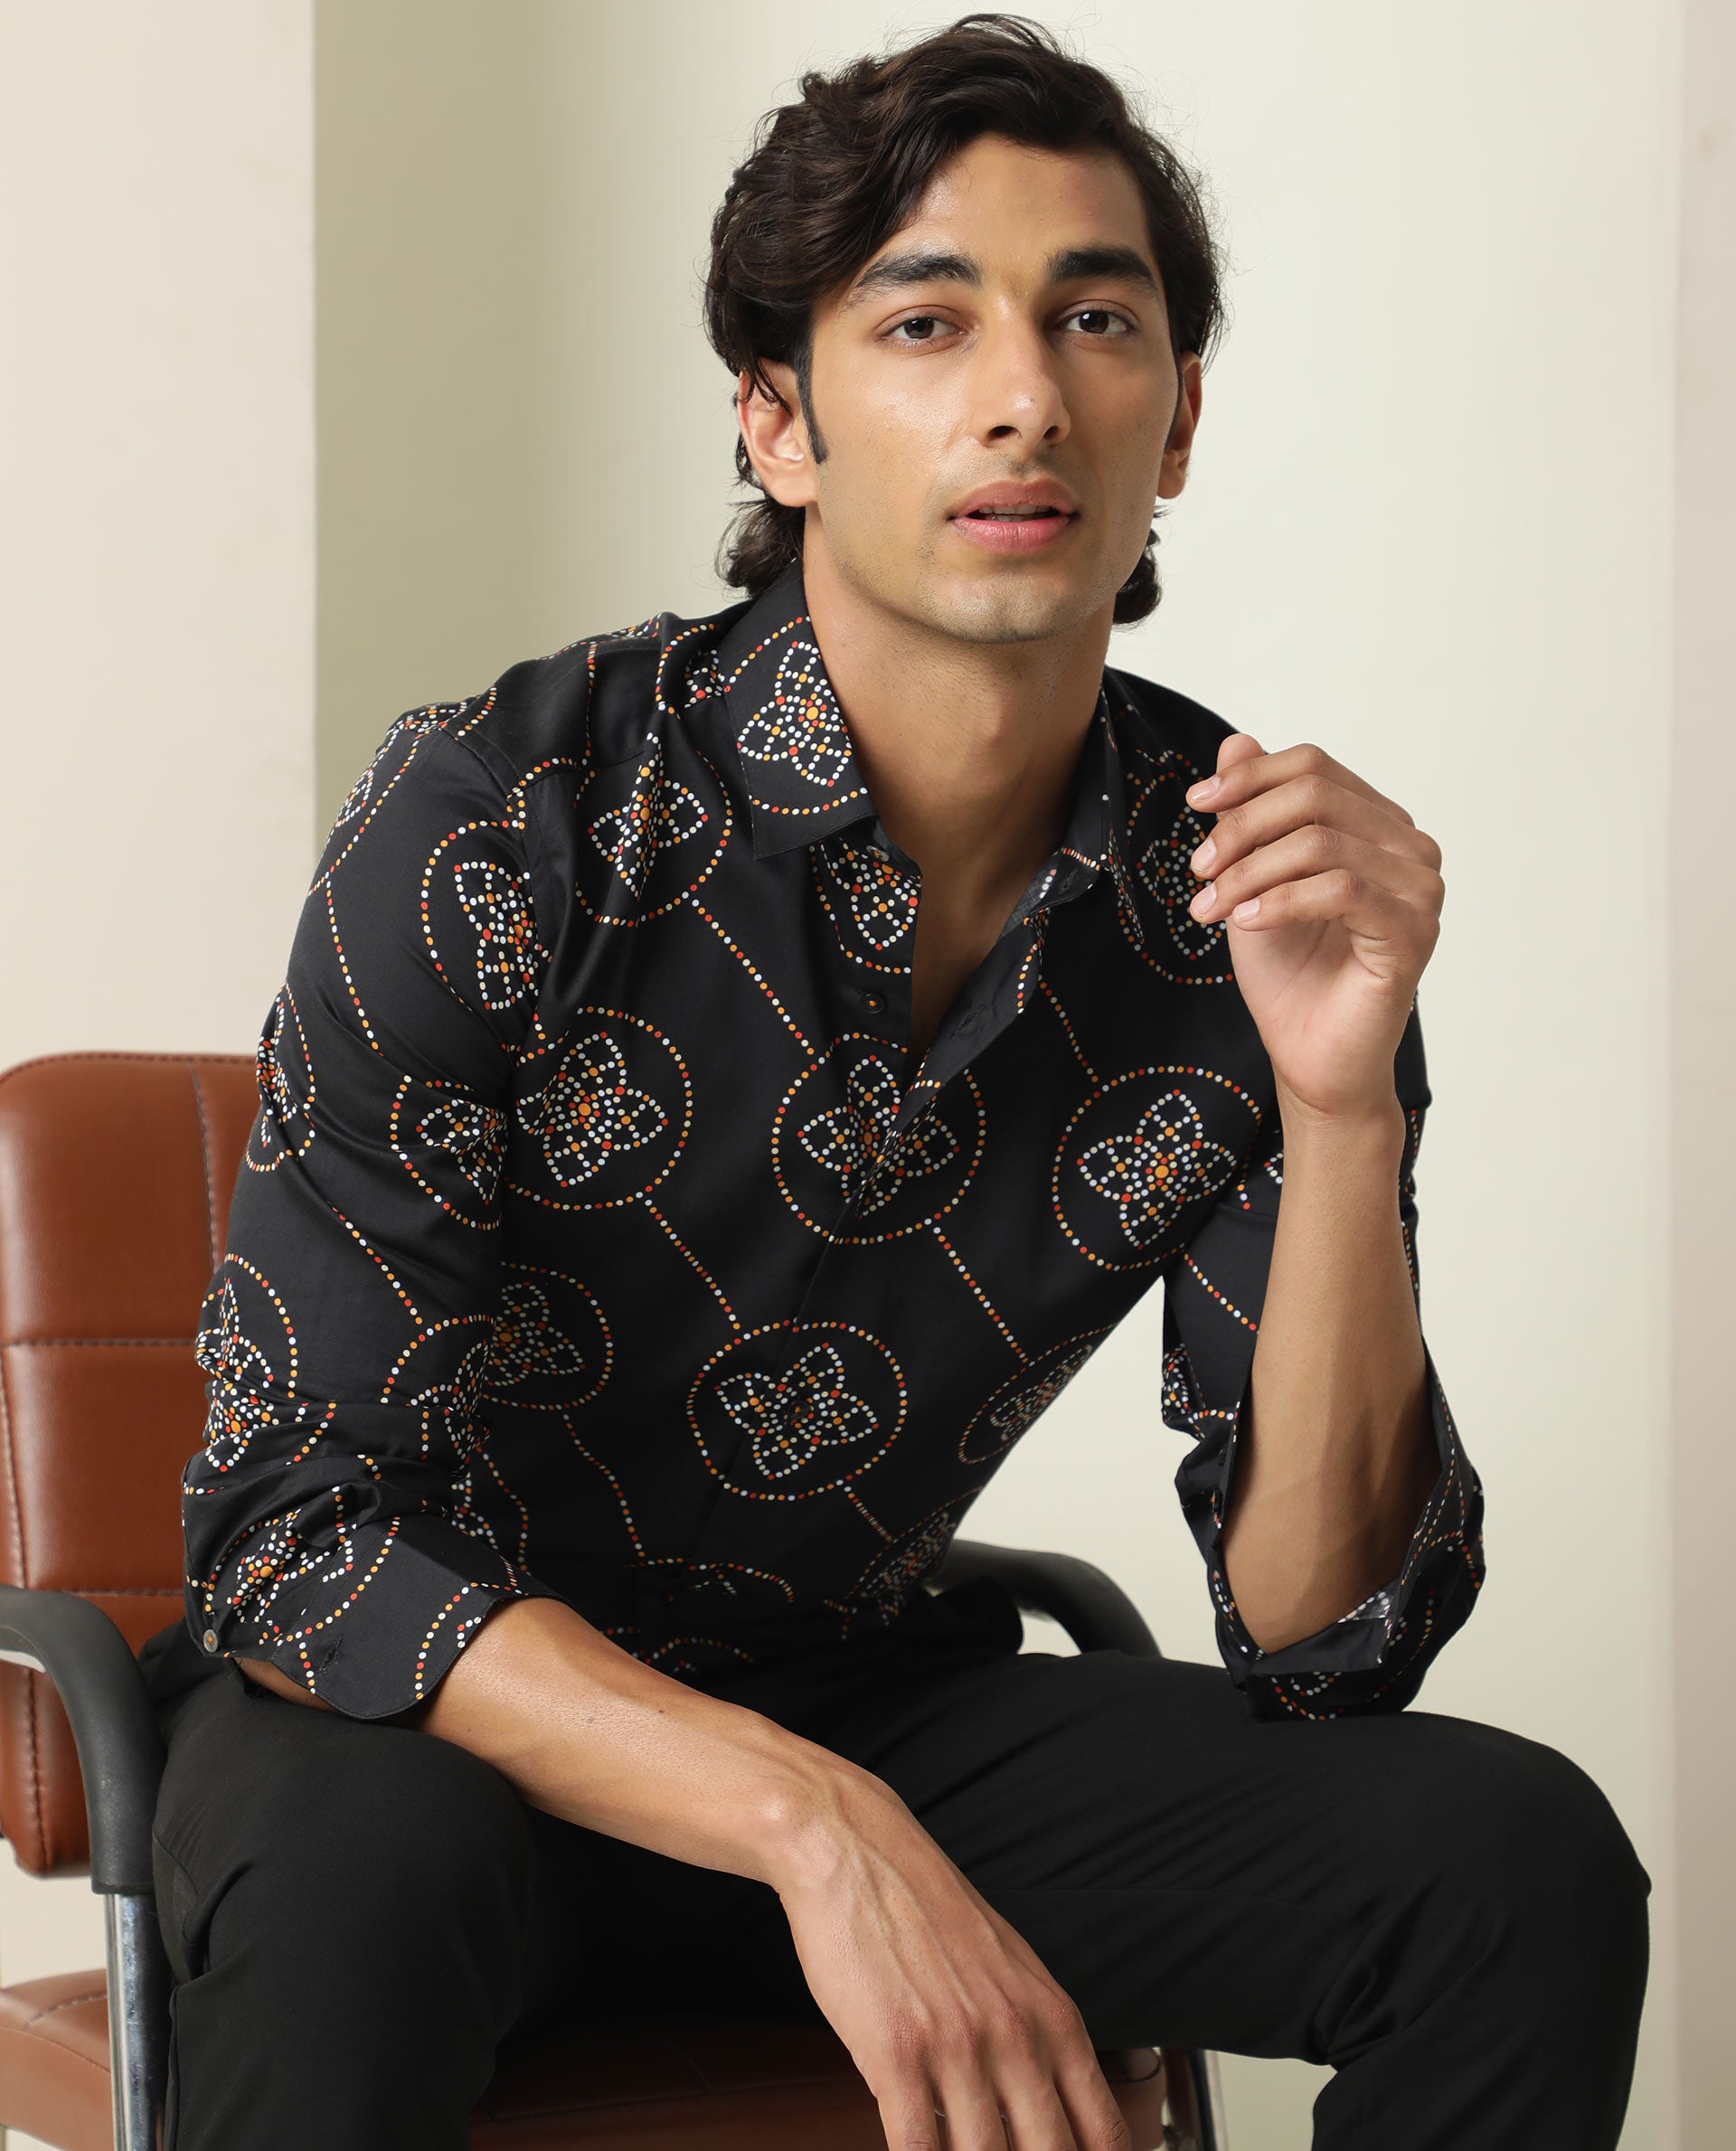 Cotton Plain/Solid Men's Full Sleeve Formal Shirts at Rs 300 in Pune